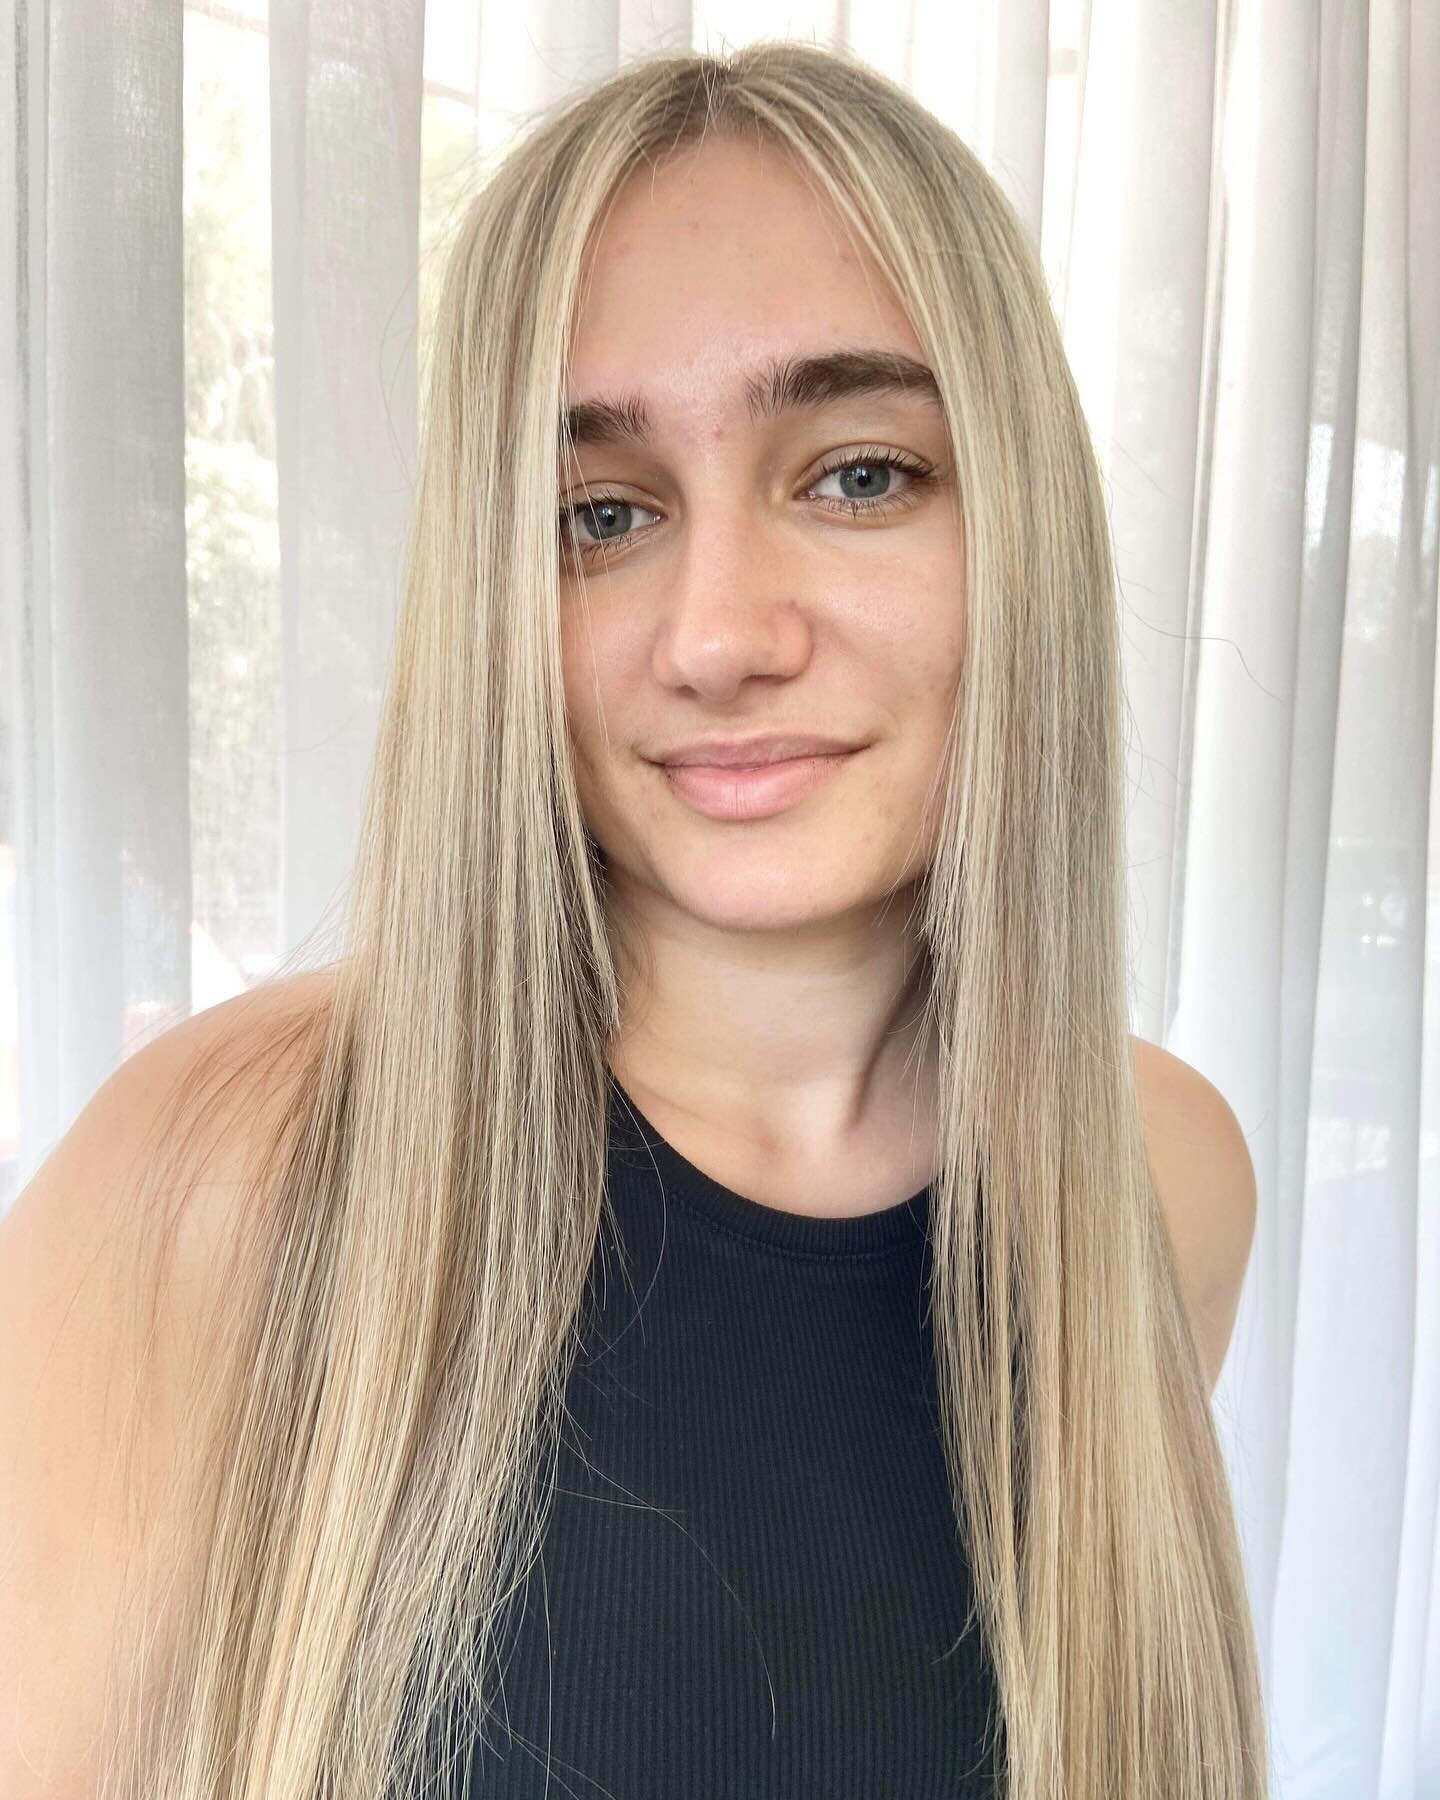 THE HARE-Y EFFECT ✦

Service - foiling and color correction 
Stylist - @amy_thehare.boutique 

📍Shop D, 6 Dutton Street Walkerston Q 4751
📱07 4857 5109 or text 0473 836 974
(Located at the Woolworths complex beside Raw Fitness gym).

#mackaysalon #